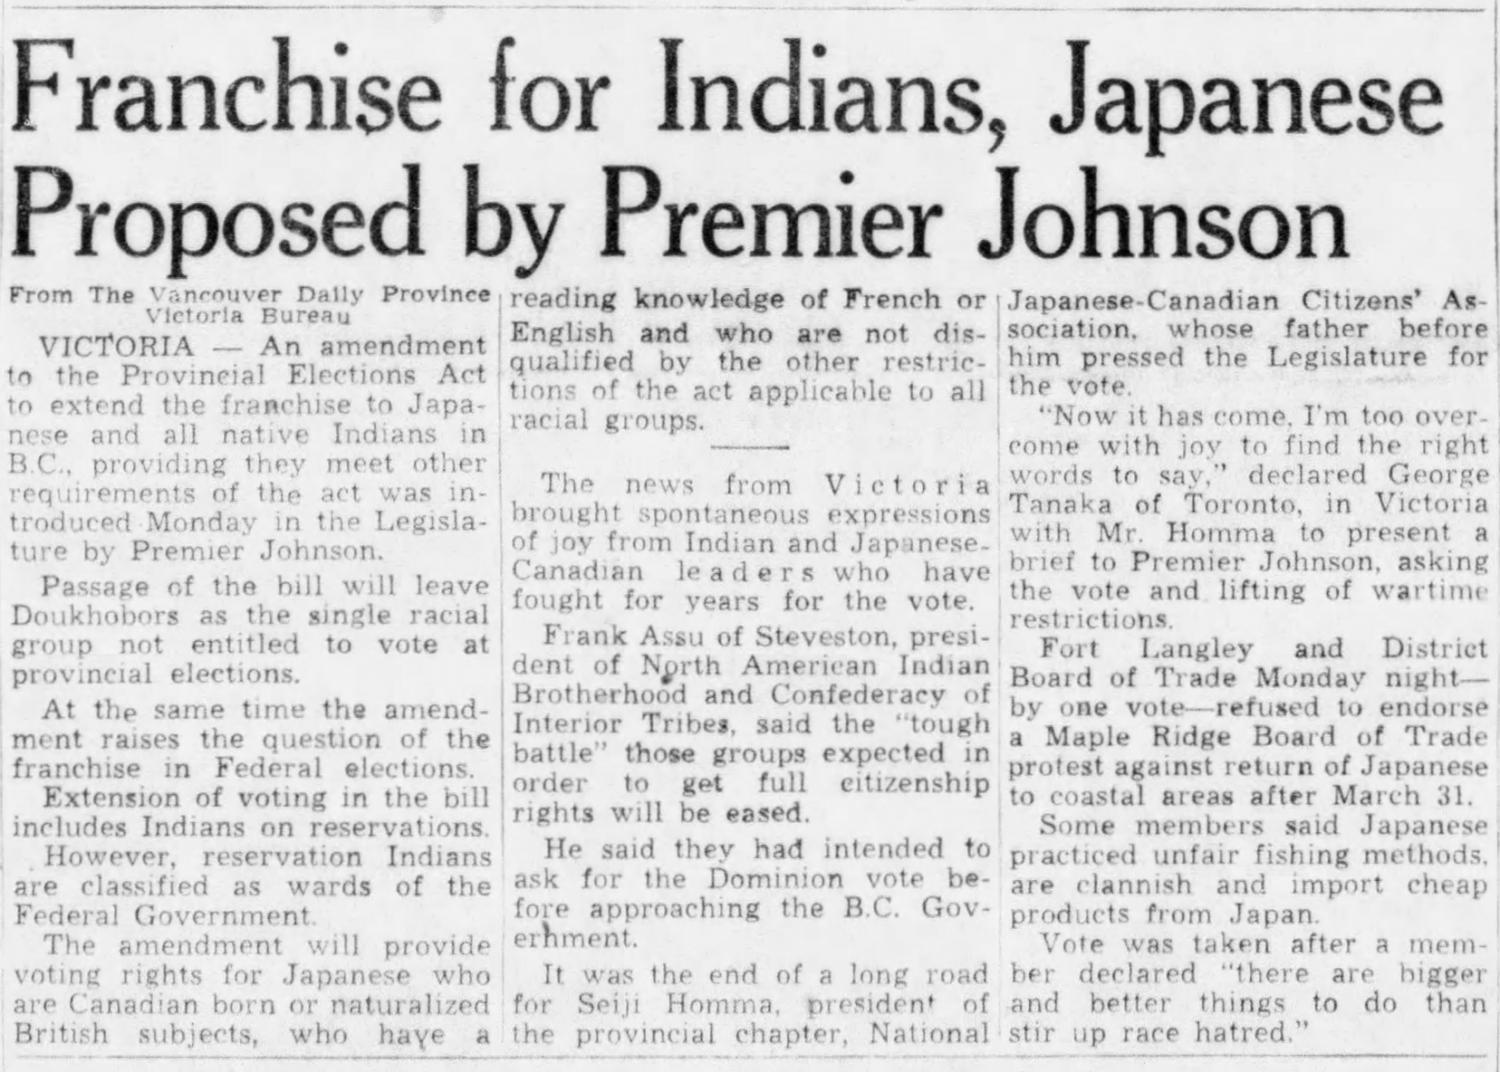 Article on Japanese and Indigenous people receiving the vote in B.C. in 1949.